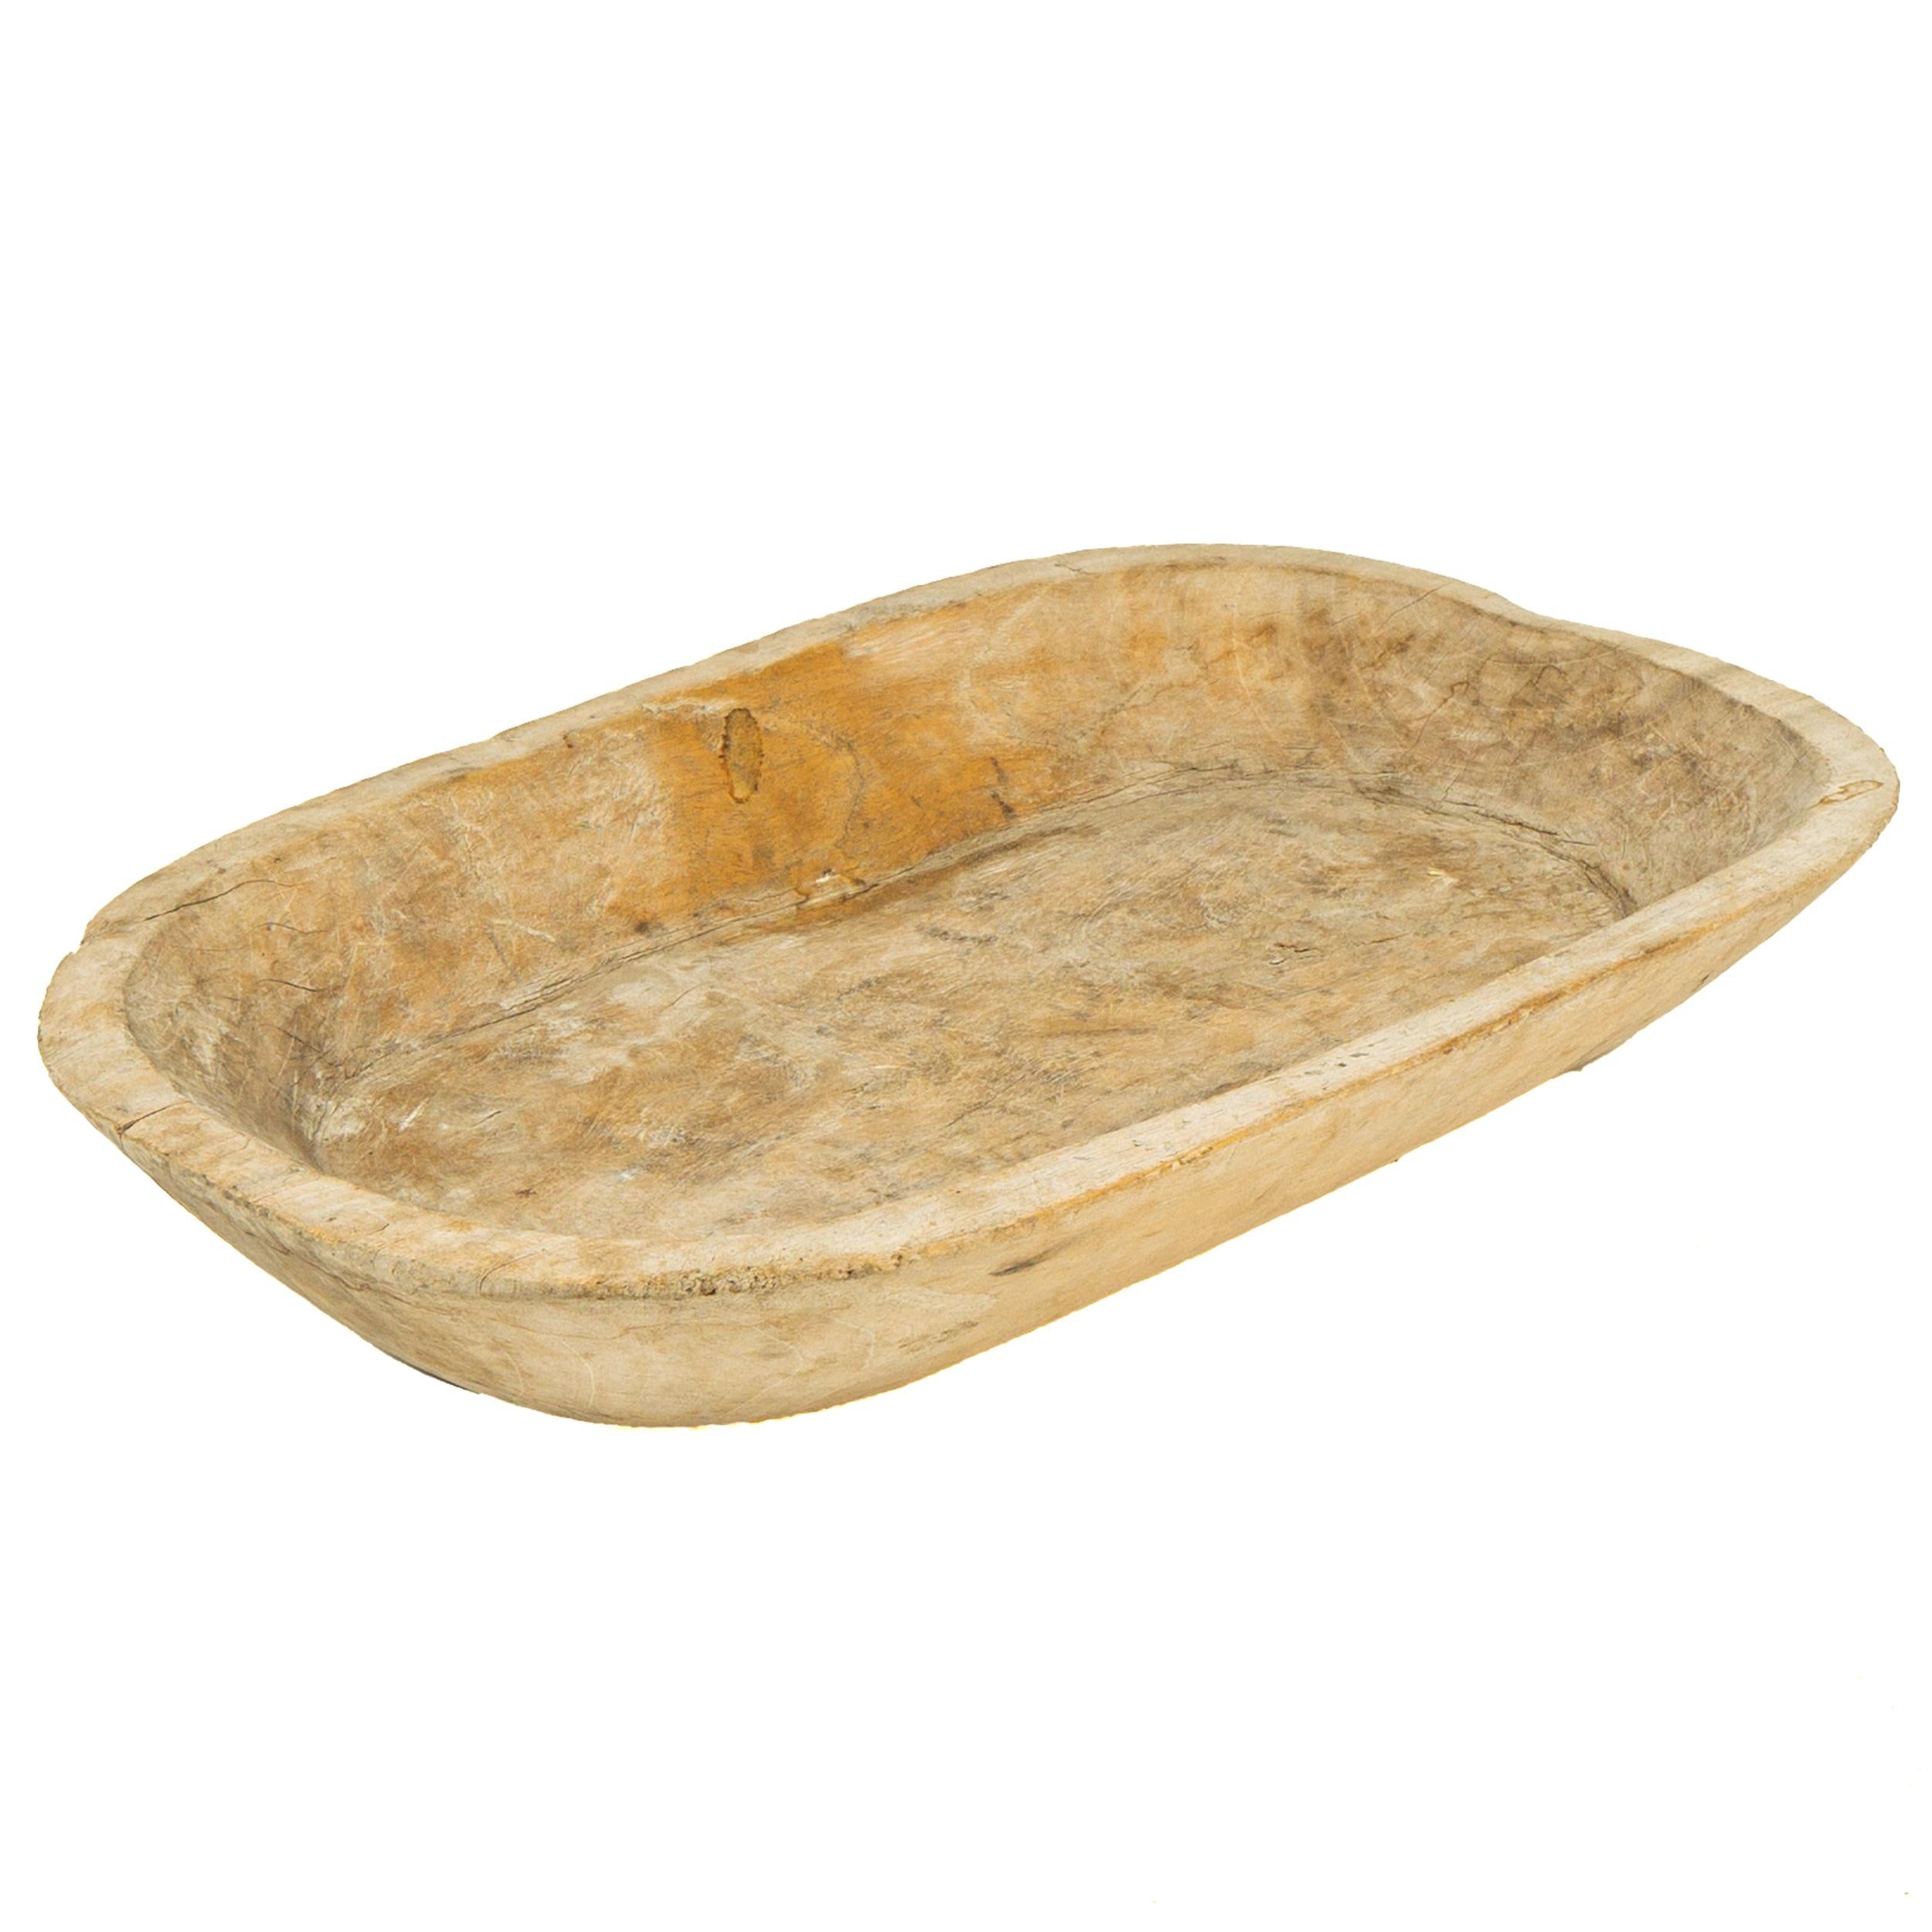 Primitive Mesquite Trough Bowl from Zacatecas, Northern México, Late 19th Century For Sale